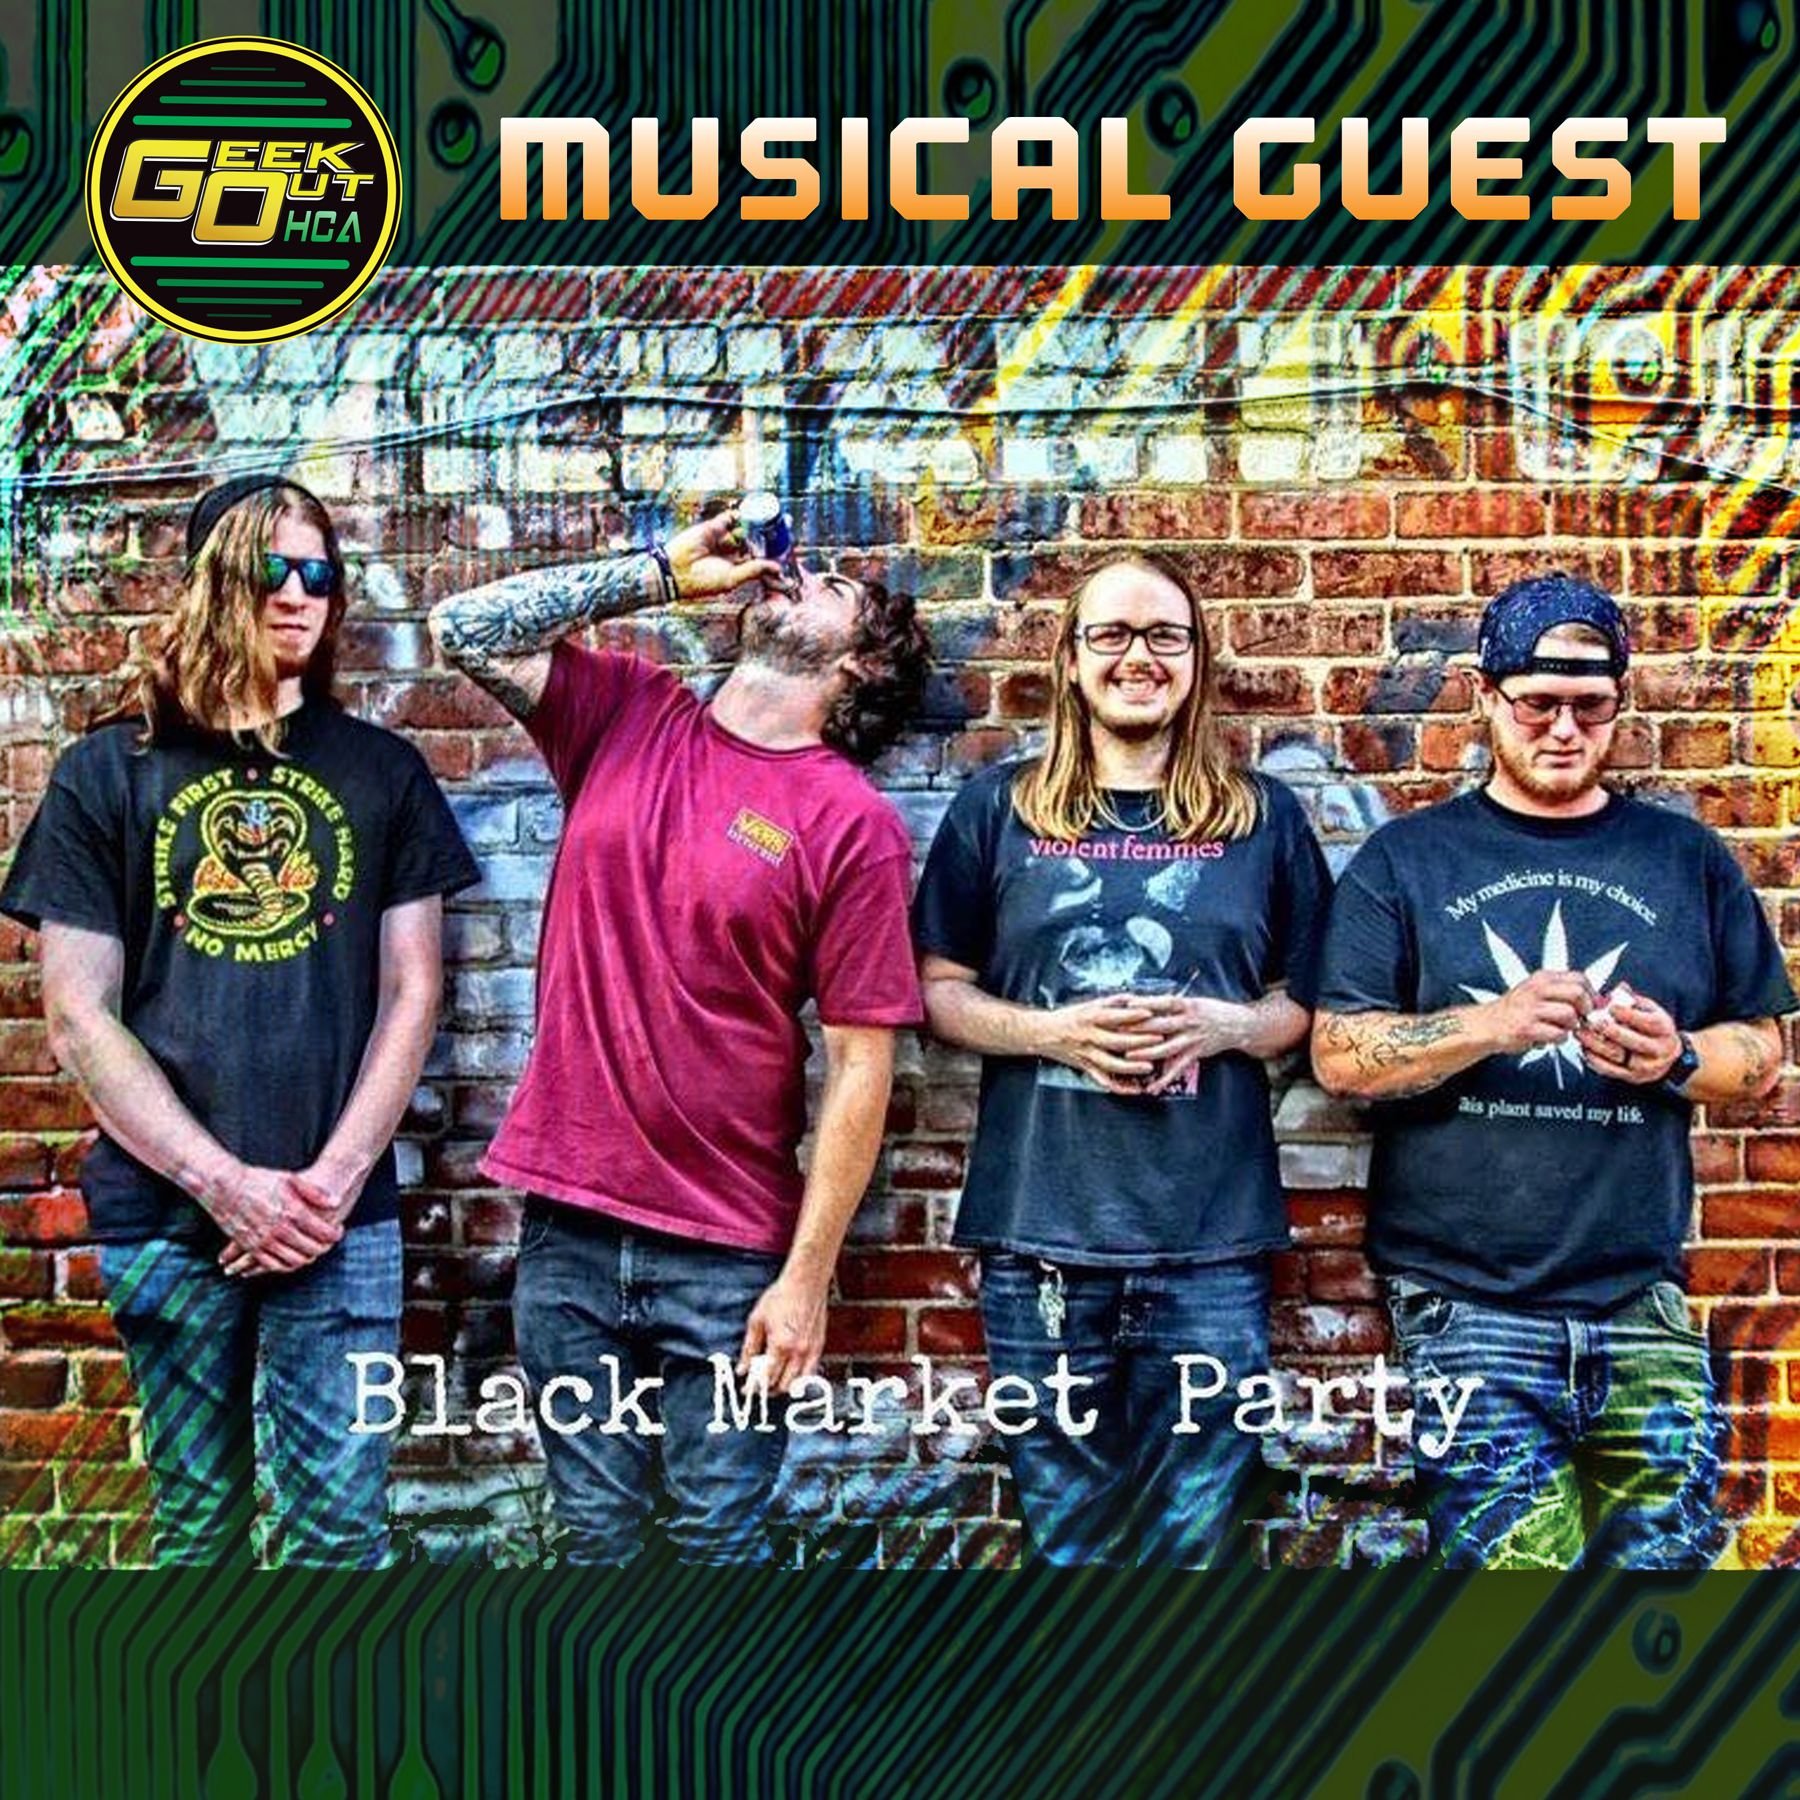   Musical Guest Announcement!  We are Black Market Party a 4 piece punk band from Hamilton Ohio. We consist of John Gay Lead Singer / rhythm guitarist Cameron Williams Lead Guitarist , Thomas Southard Drummer , &amp; Josh Brooks Bassist! We like to b